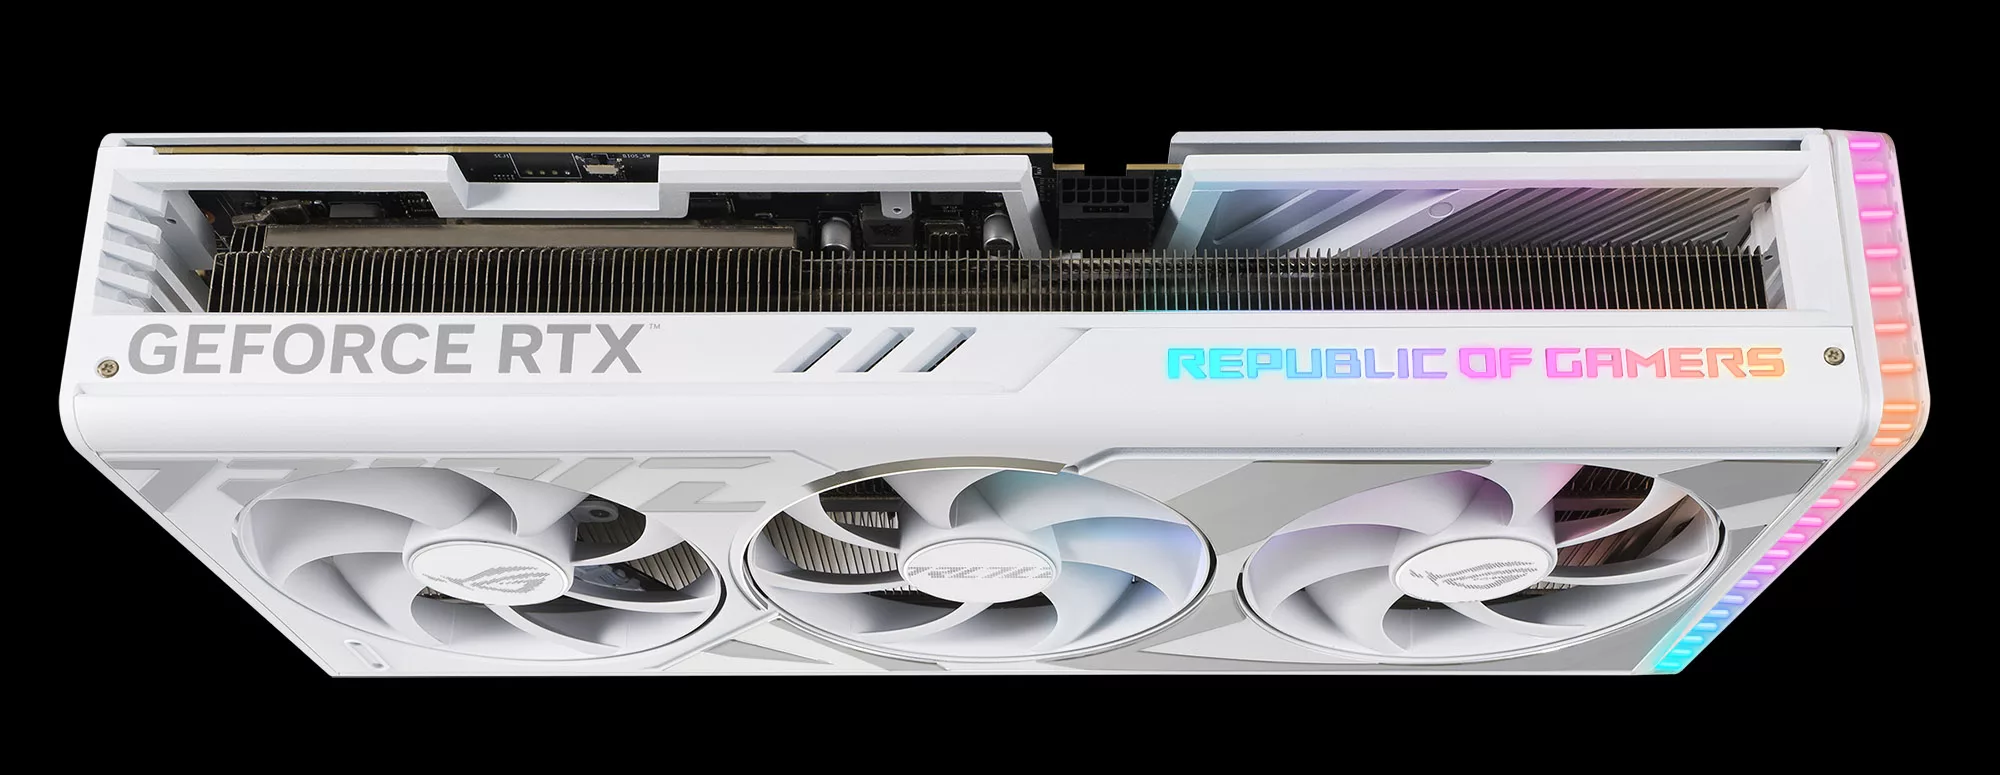 A front view of the ROG Strix GeForce RTX 4080 White Edition on a black background.